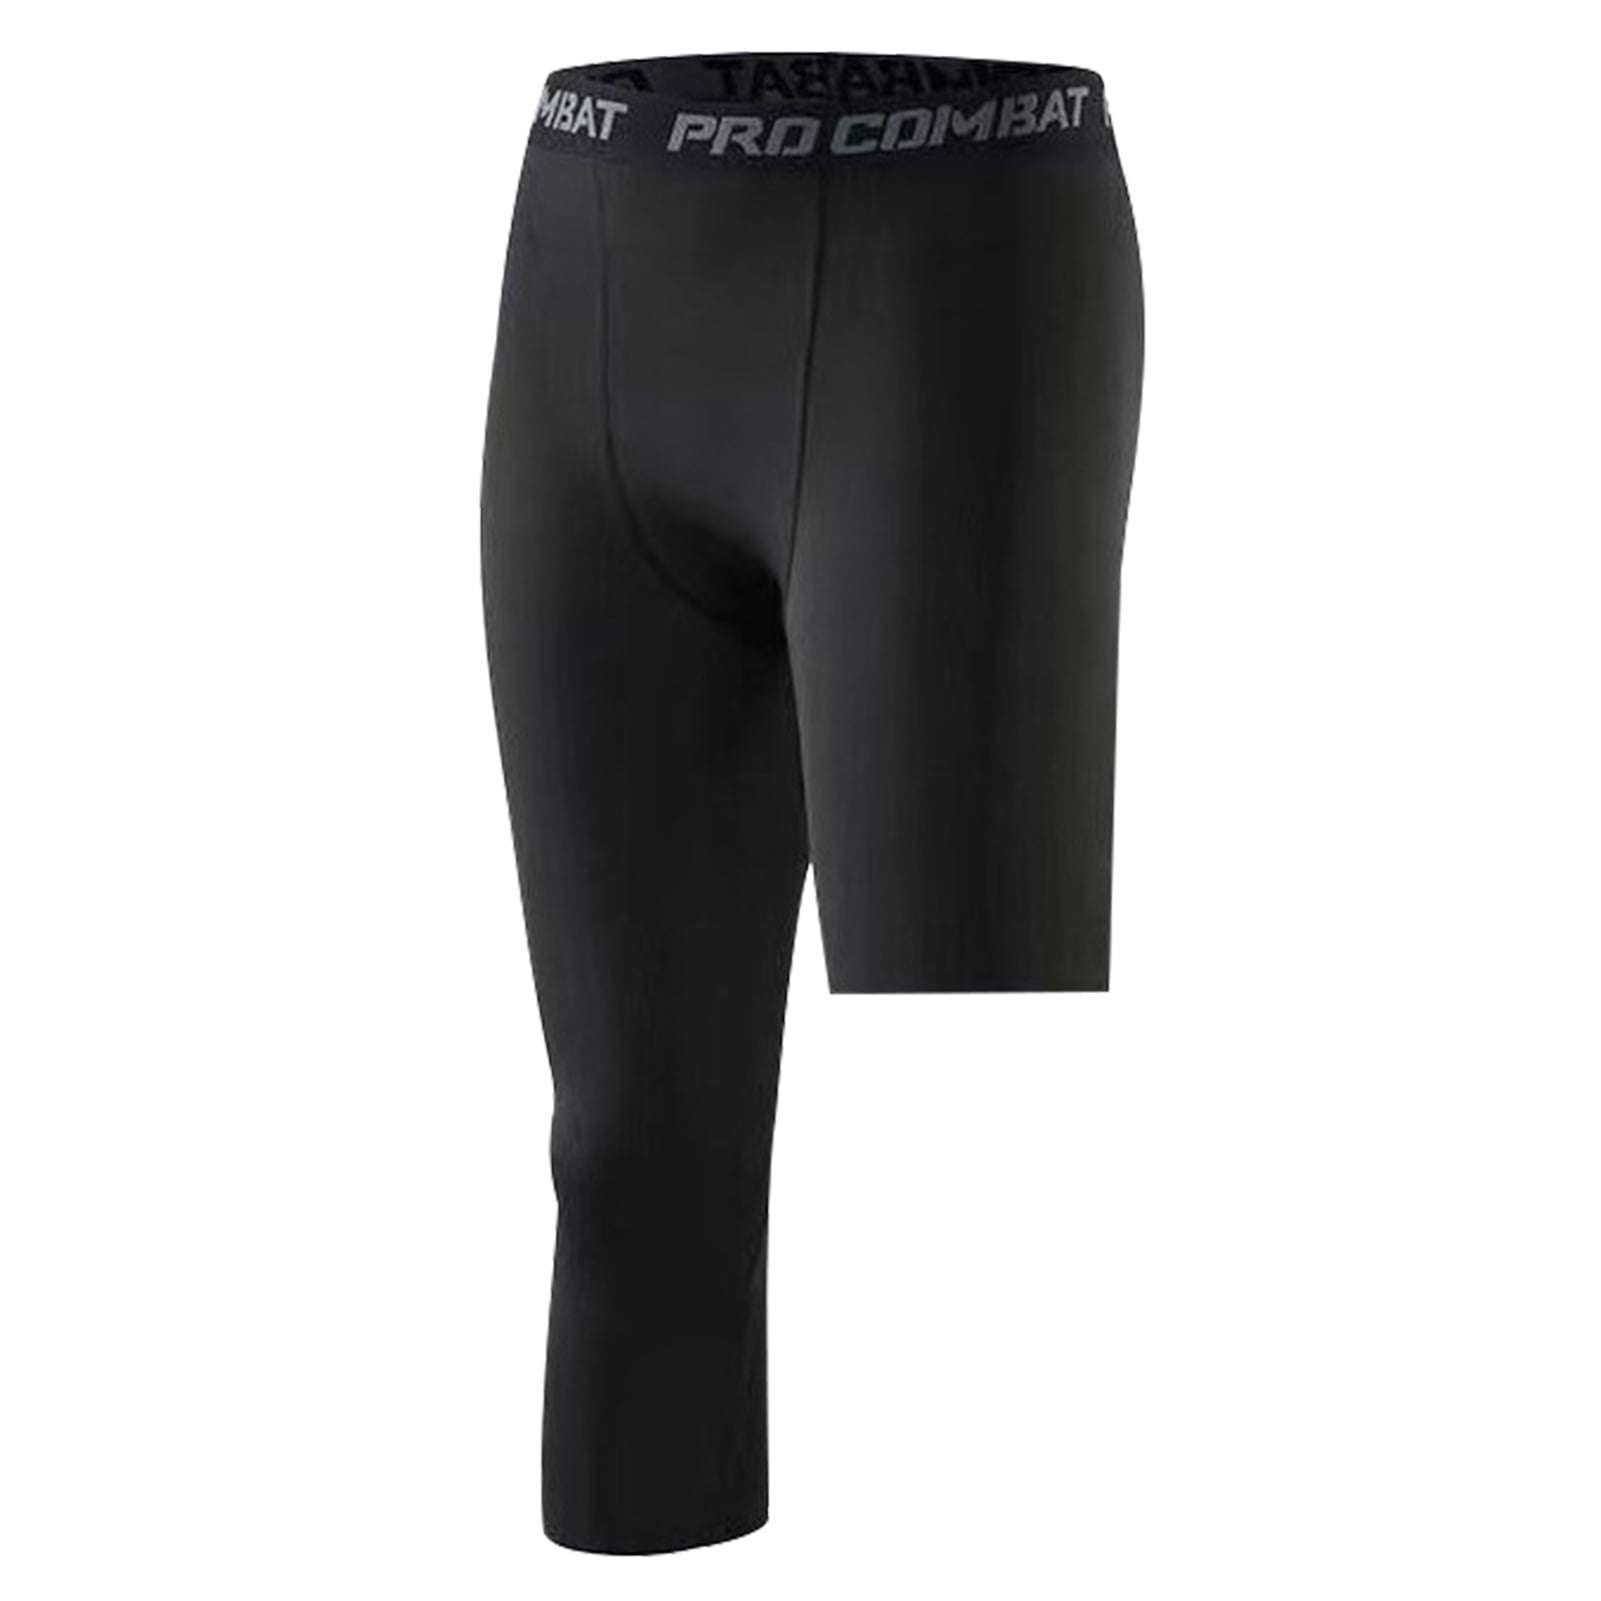 Men's Compression 3/4 Running Workout Tights Cycling Basketball Cropped Pants 